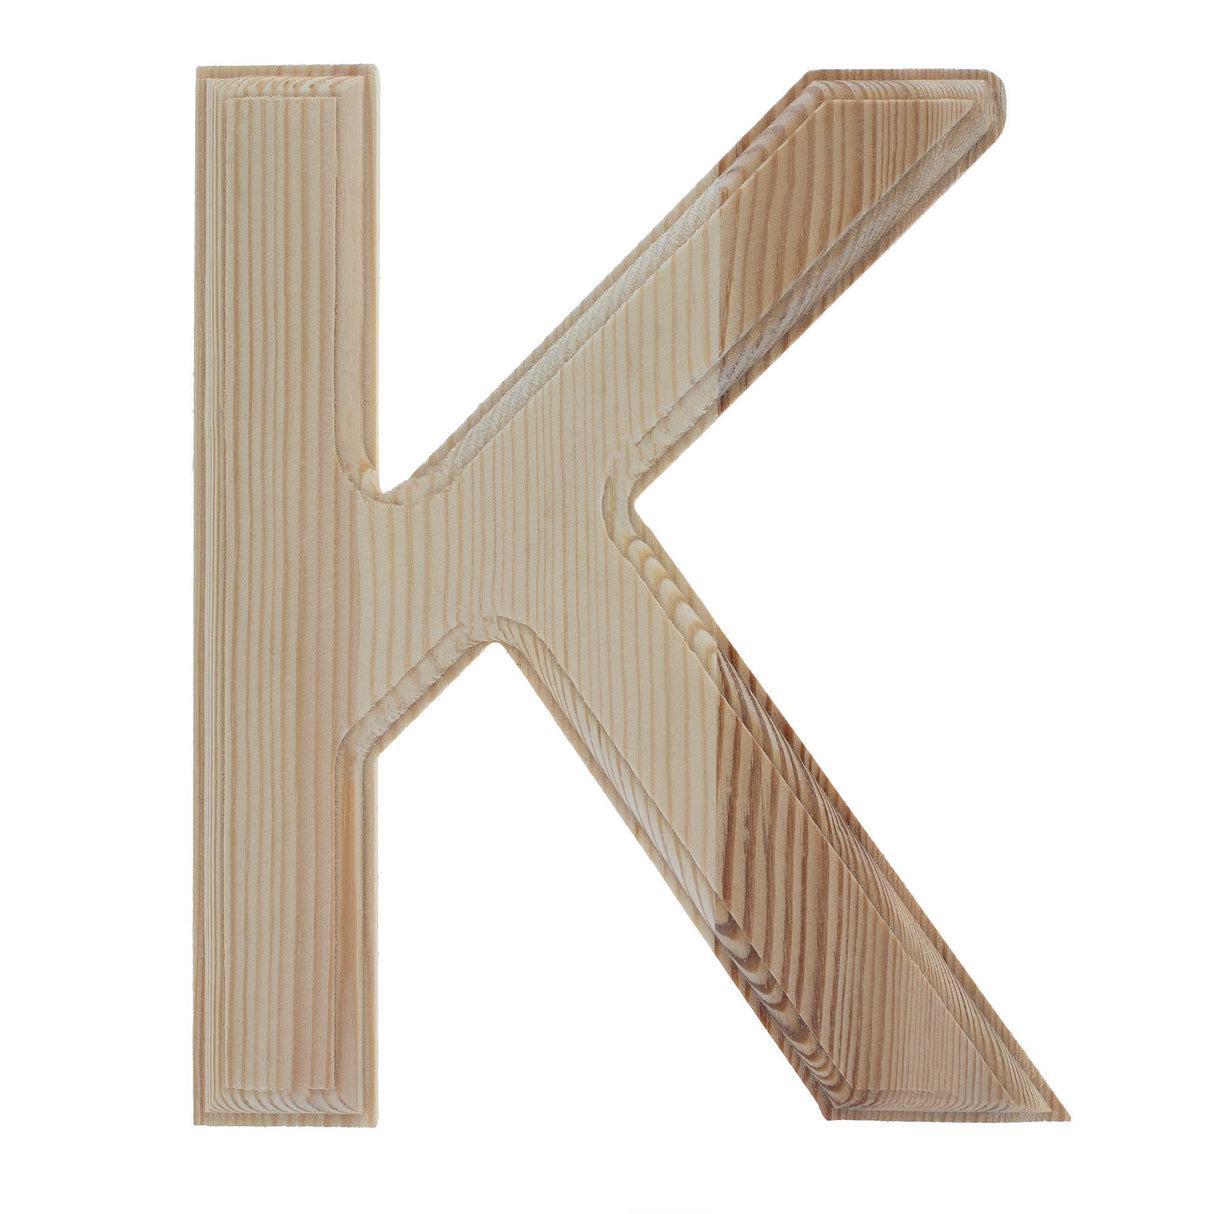 Wood Unfinished Wooden Arial Font Letter K (6.25 Inches) in Beige color